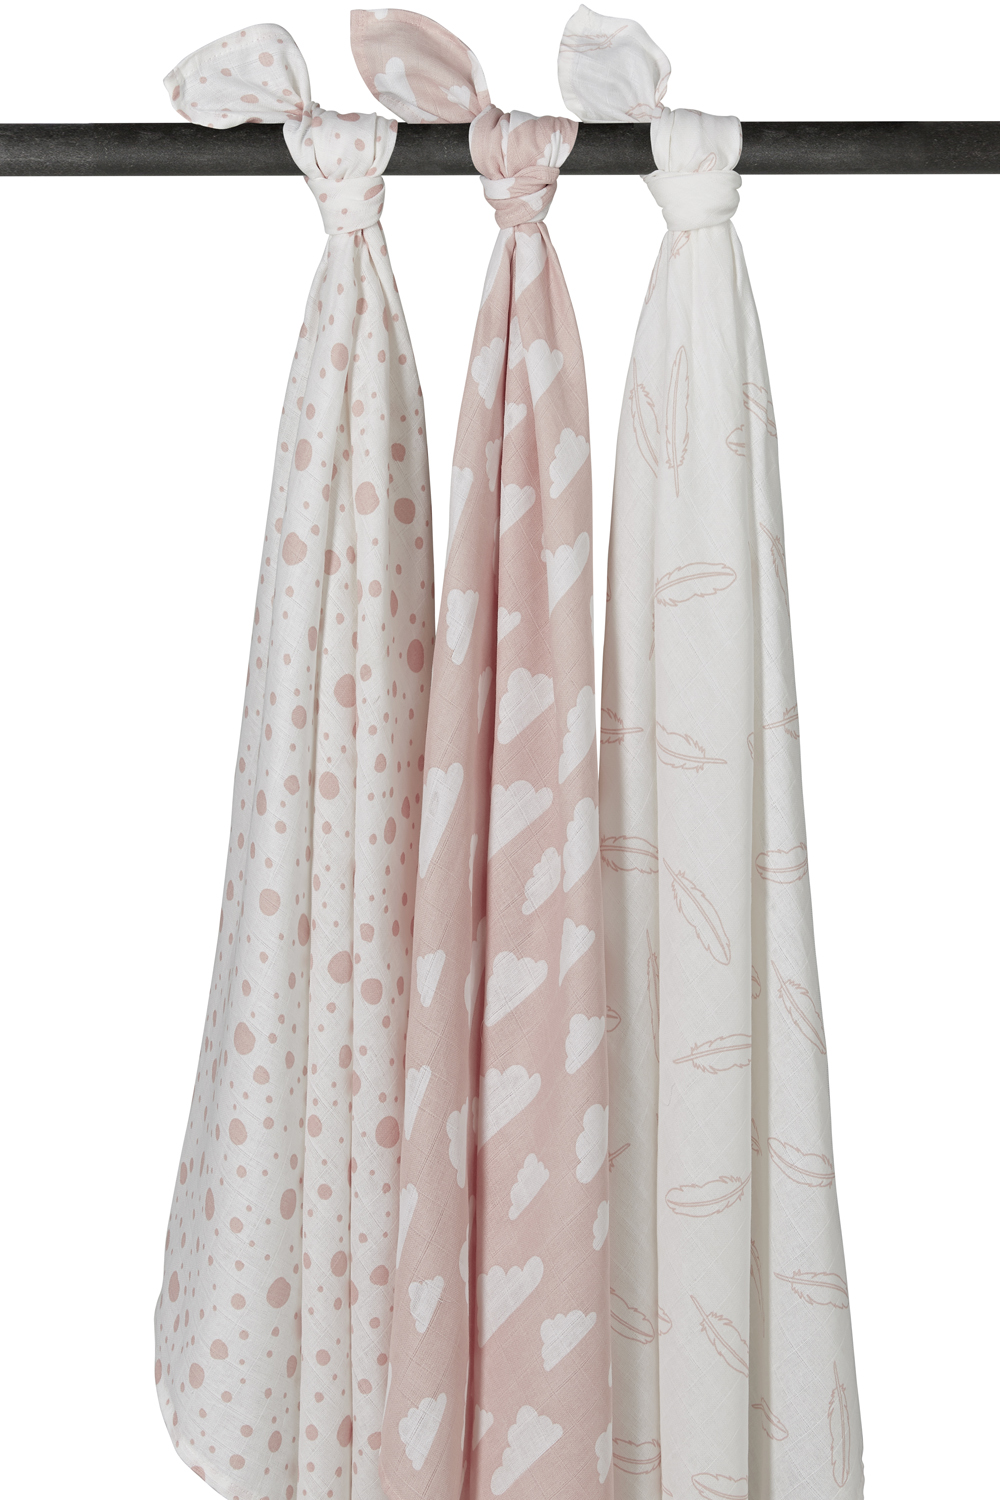 Musselin Swaddles 3-Pack Feathers-Clouds-Dots - Roze/Weiß - 120x120cm